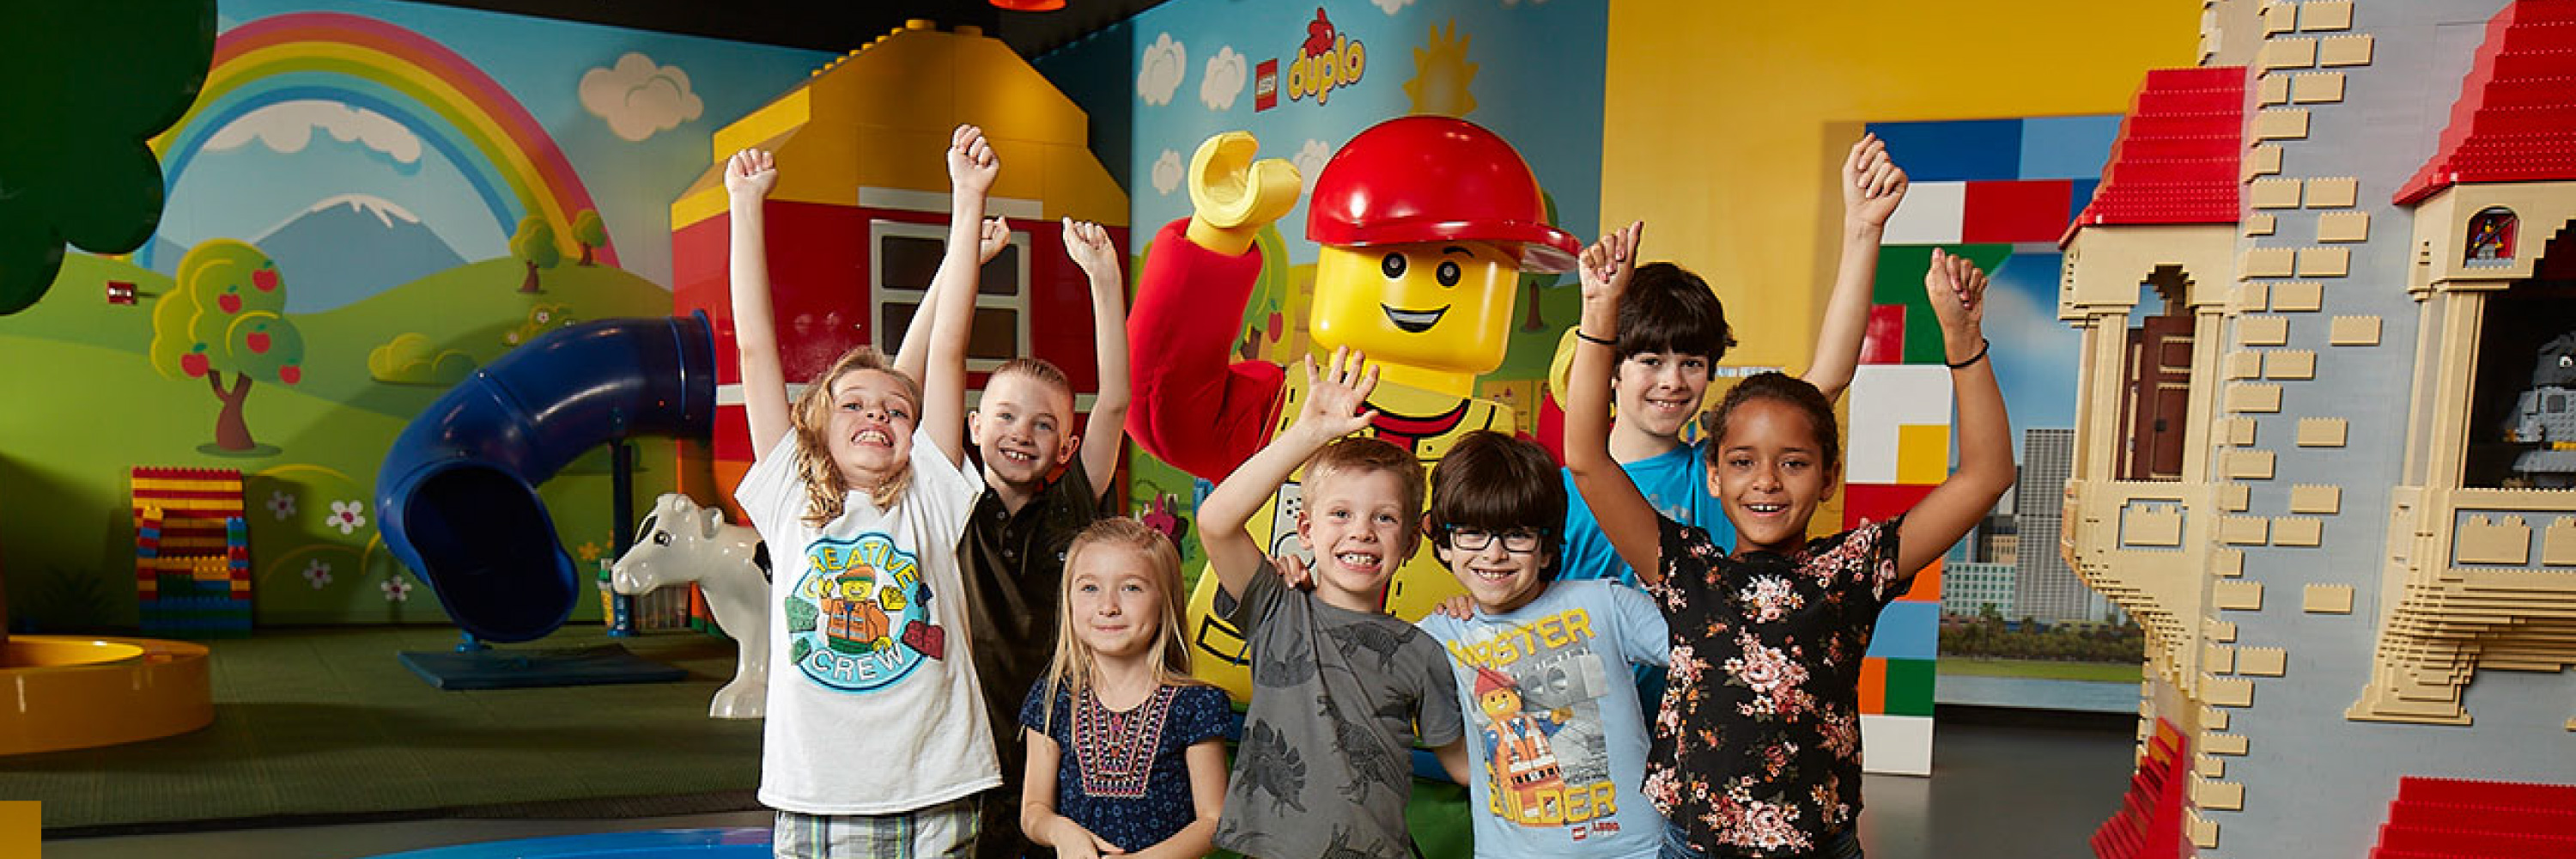 Meet and Greet LEGO Characters at LEGOLAND Discovery Centre Manchester